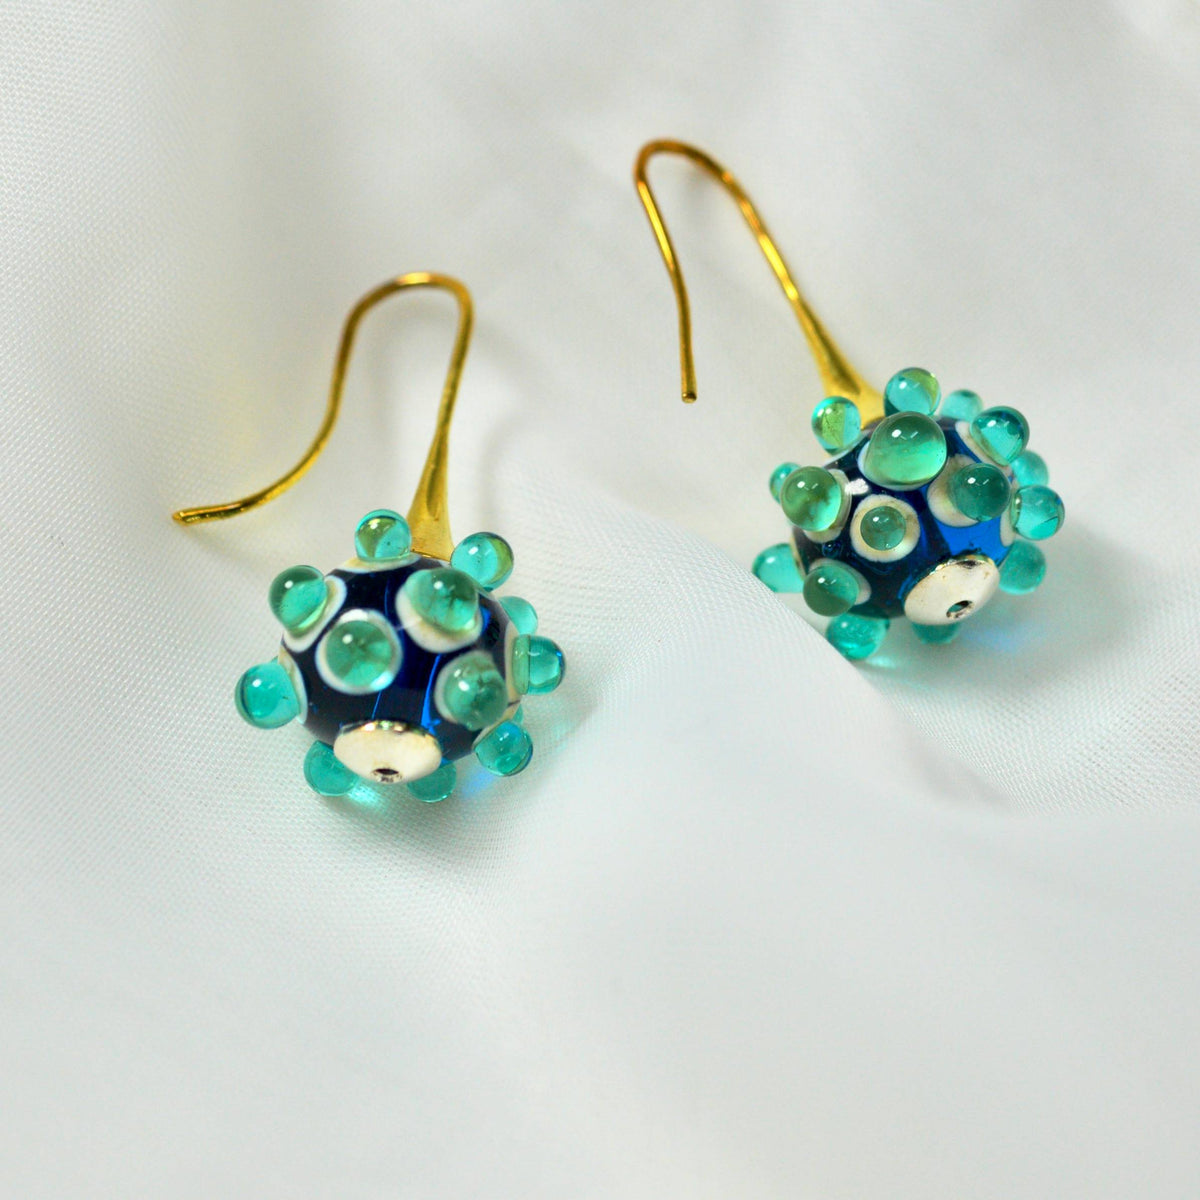 Murano Glass Orianna Bead Earrings, Turquoise, Crafted In Italy - My Italian Decor